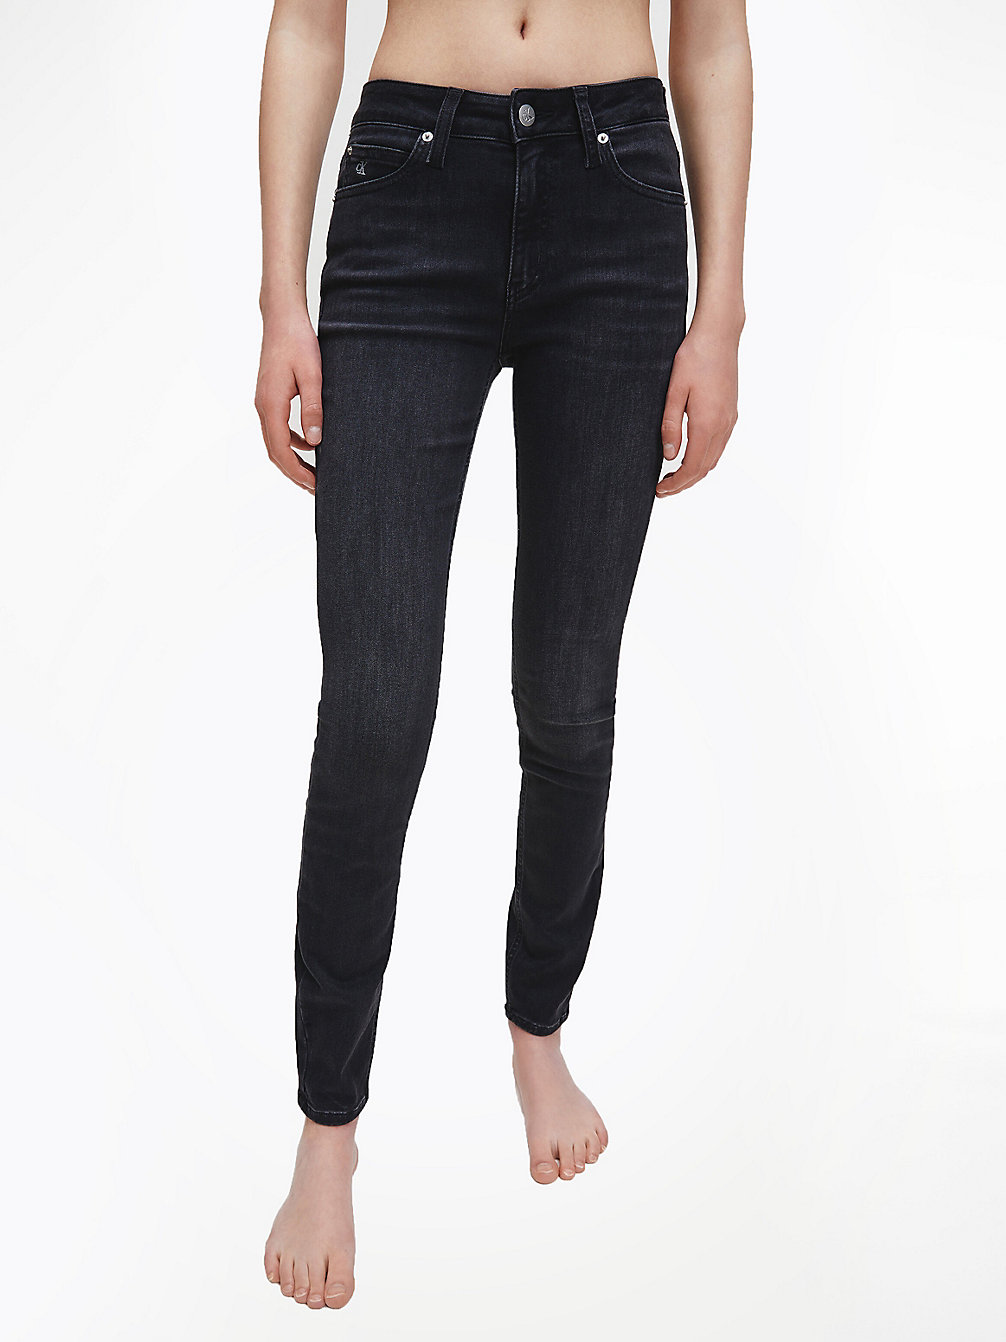 ZZ002 WASHED BLACK > Mid Rise Skinny Jeans > undefined dames - Calvin Klein